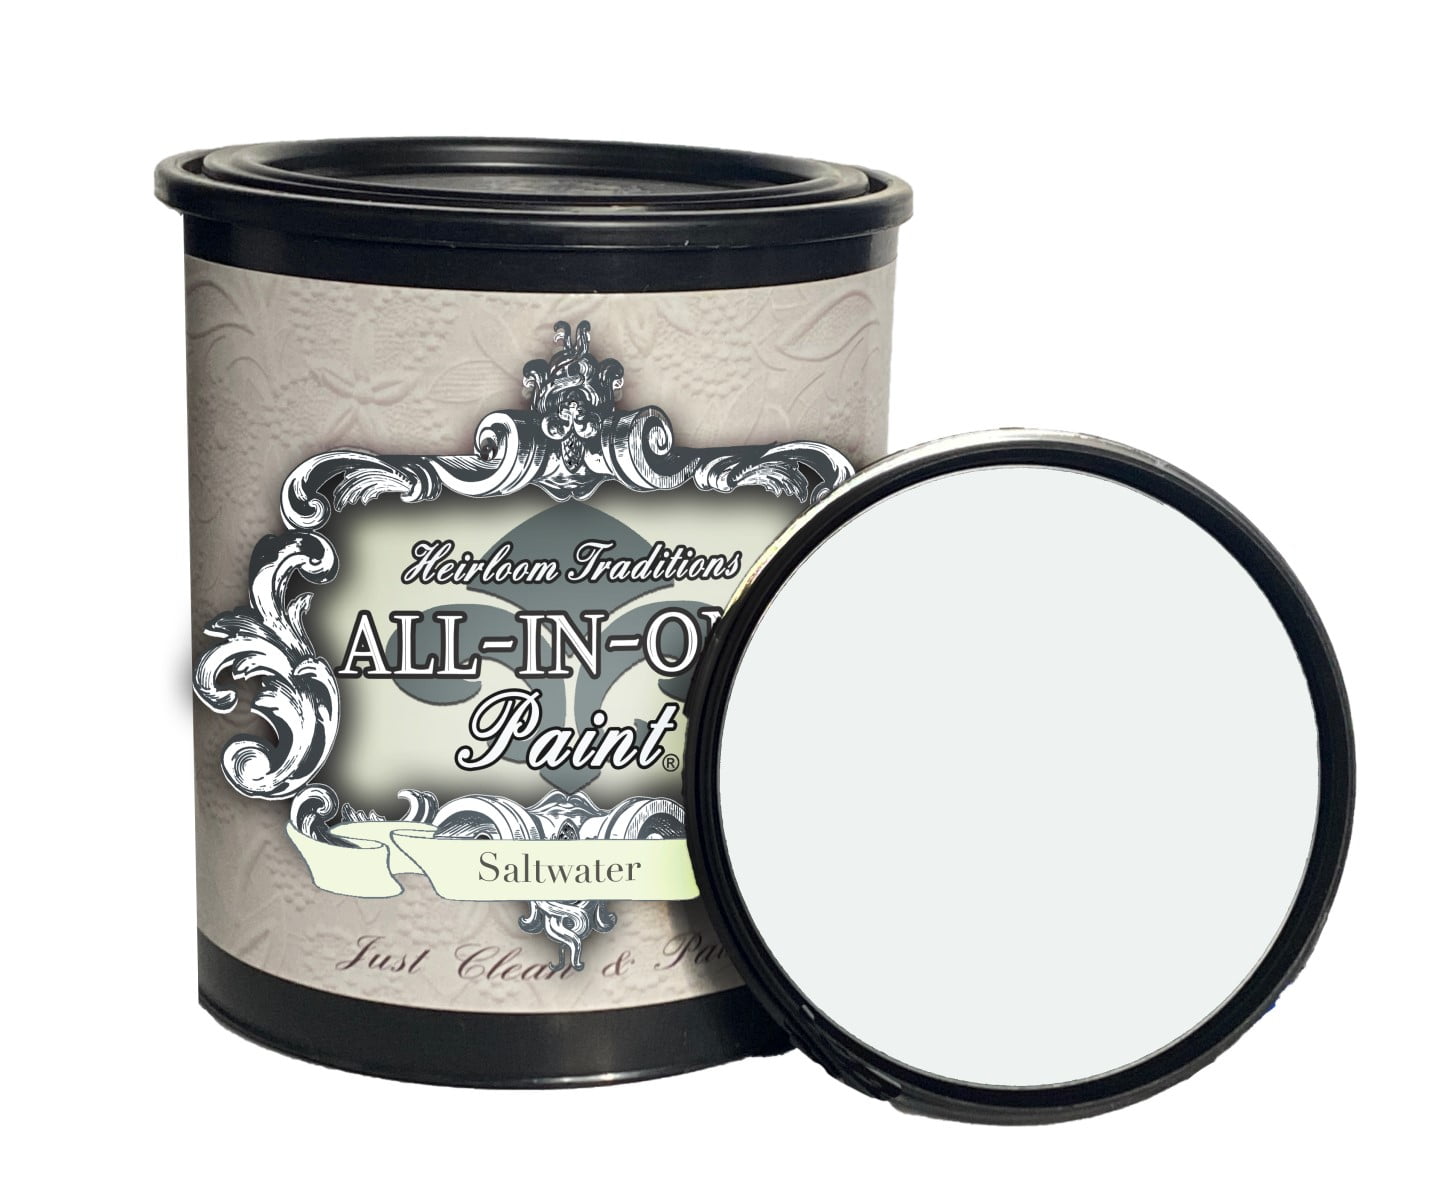 All-In-One Paint, Saltwater (pale Green), 32 fl oz Quart. Durable Cabinet and Furniture Paint. Built in Primer and Top Coat, No Sanding Needed.